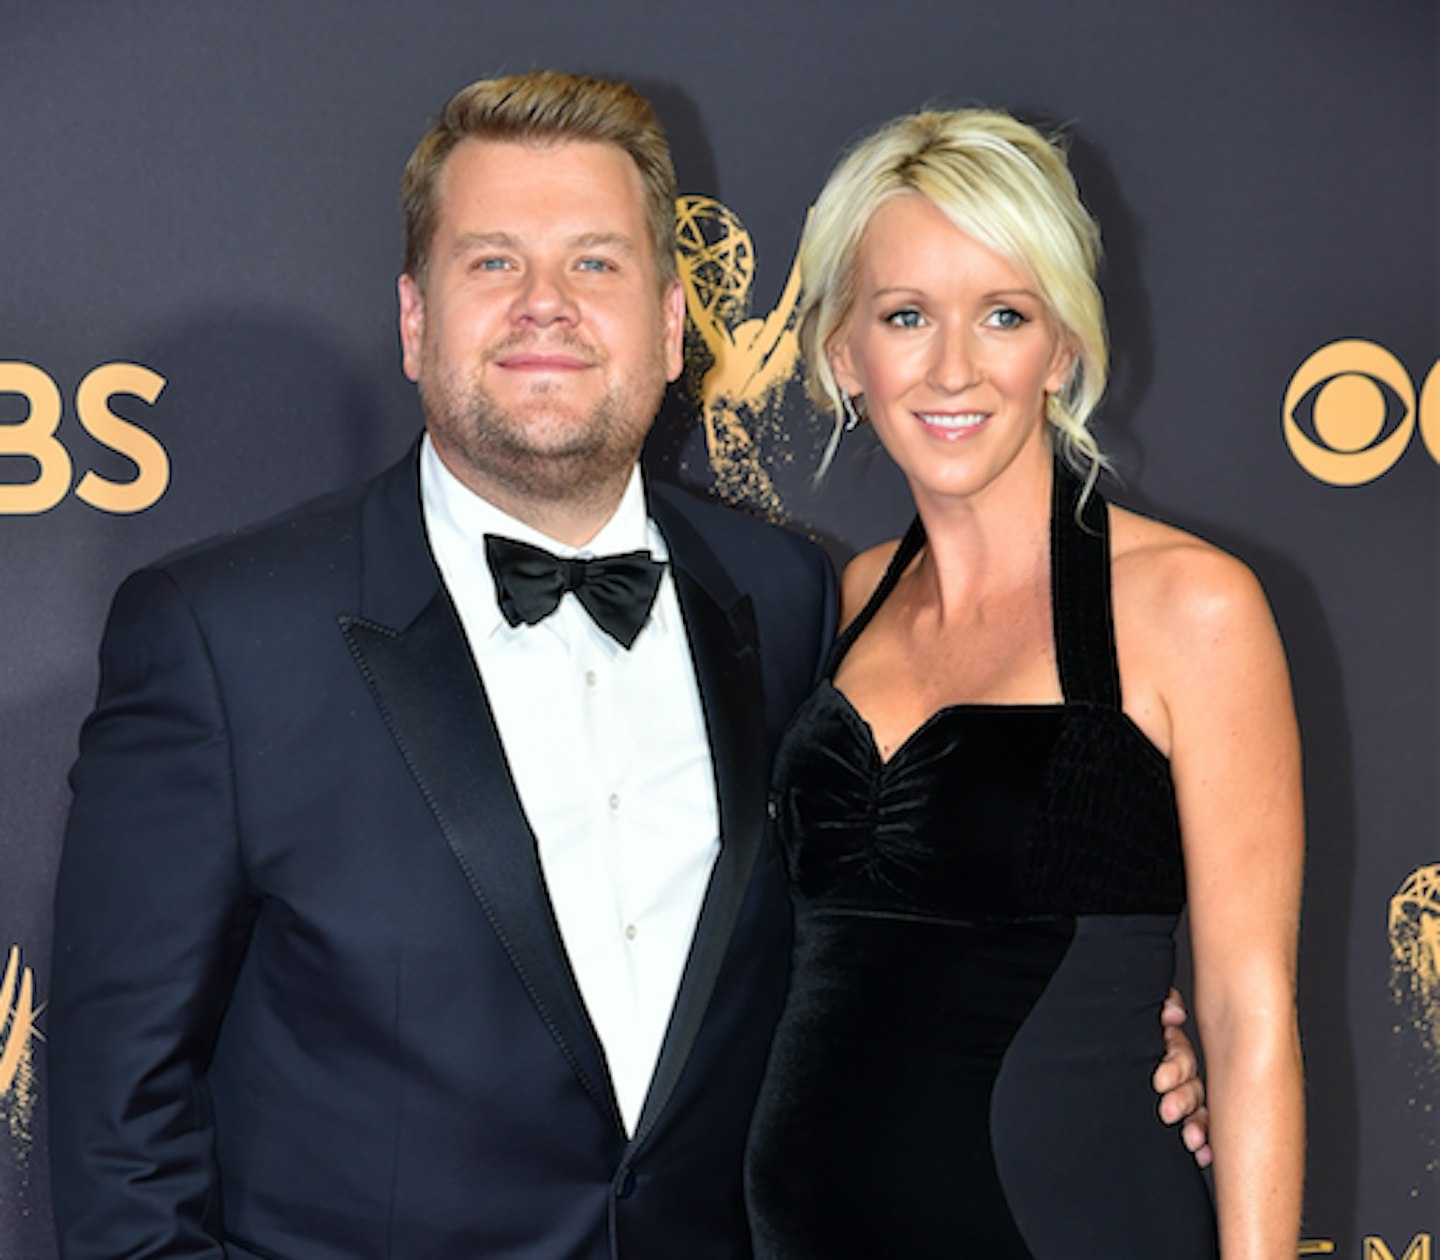 James Corden and wife Julia at the Emmy Awards